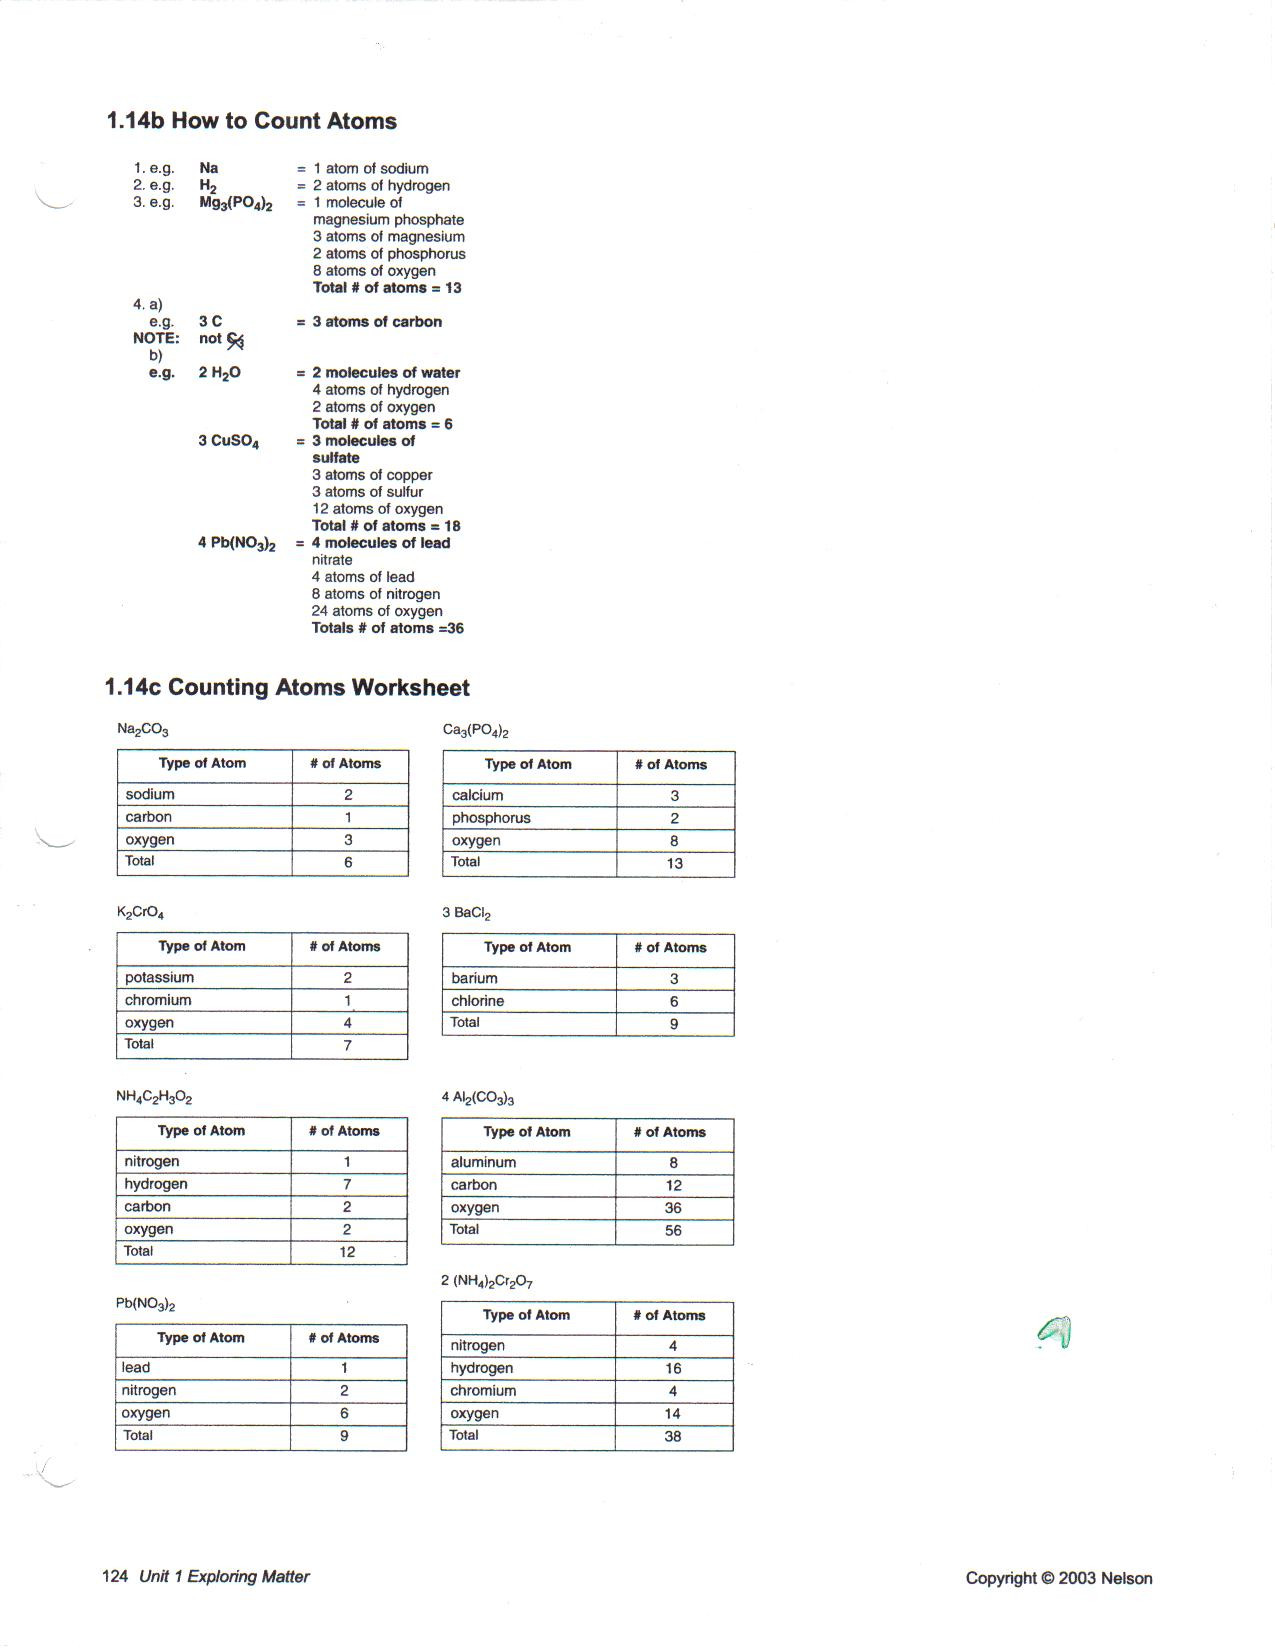 Counting atoms Worksheet Answers toxic Science